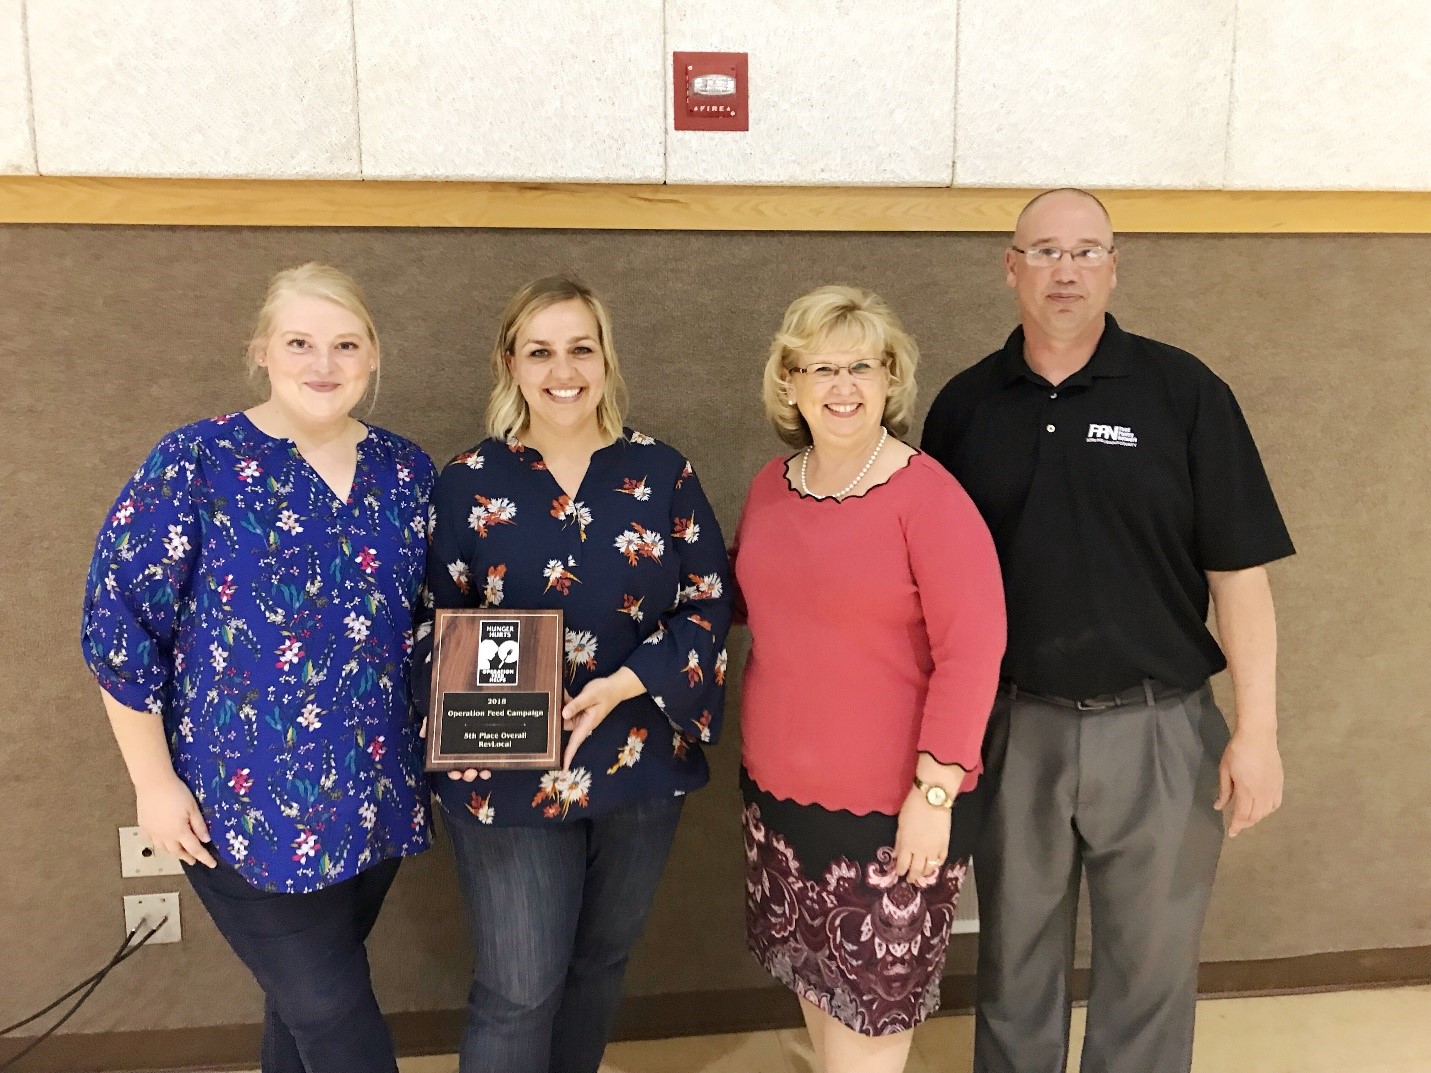 RevLocal employees received award from Licking County Food Pantry Network for 2018 Operation Feed campaign